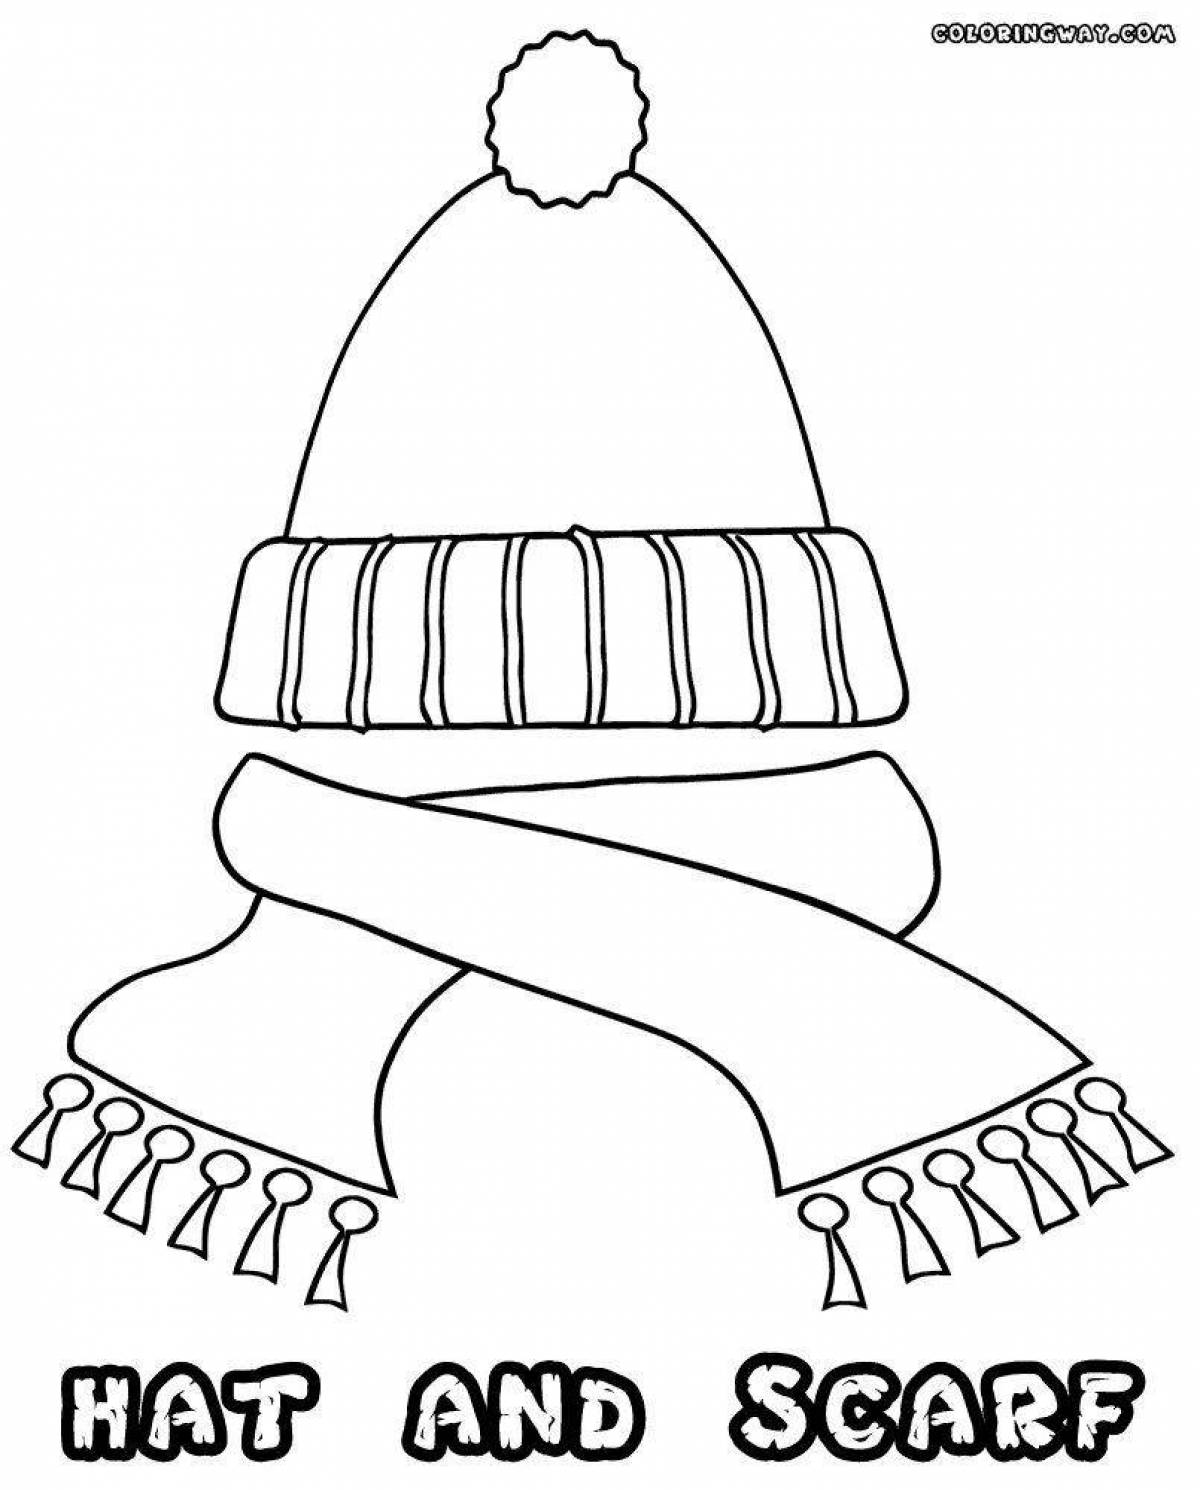 Creative hat coloring book for 2-3 year olds